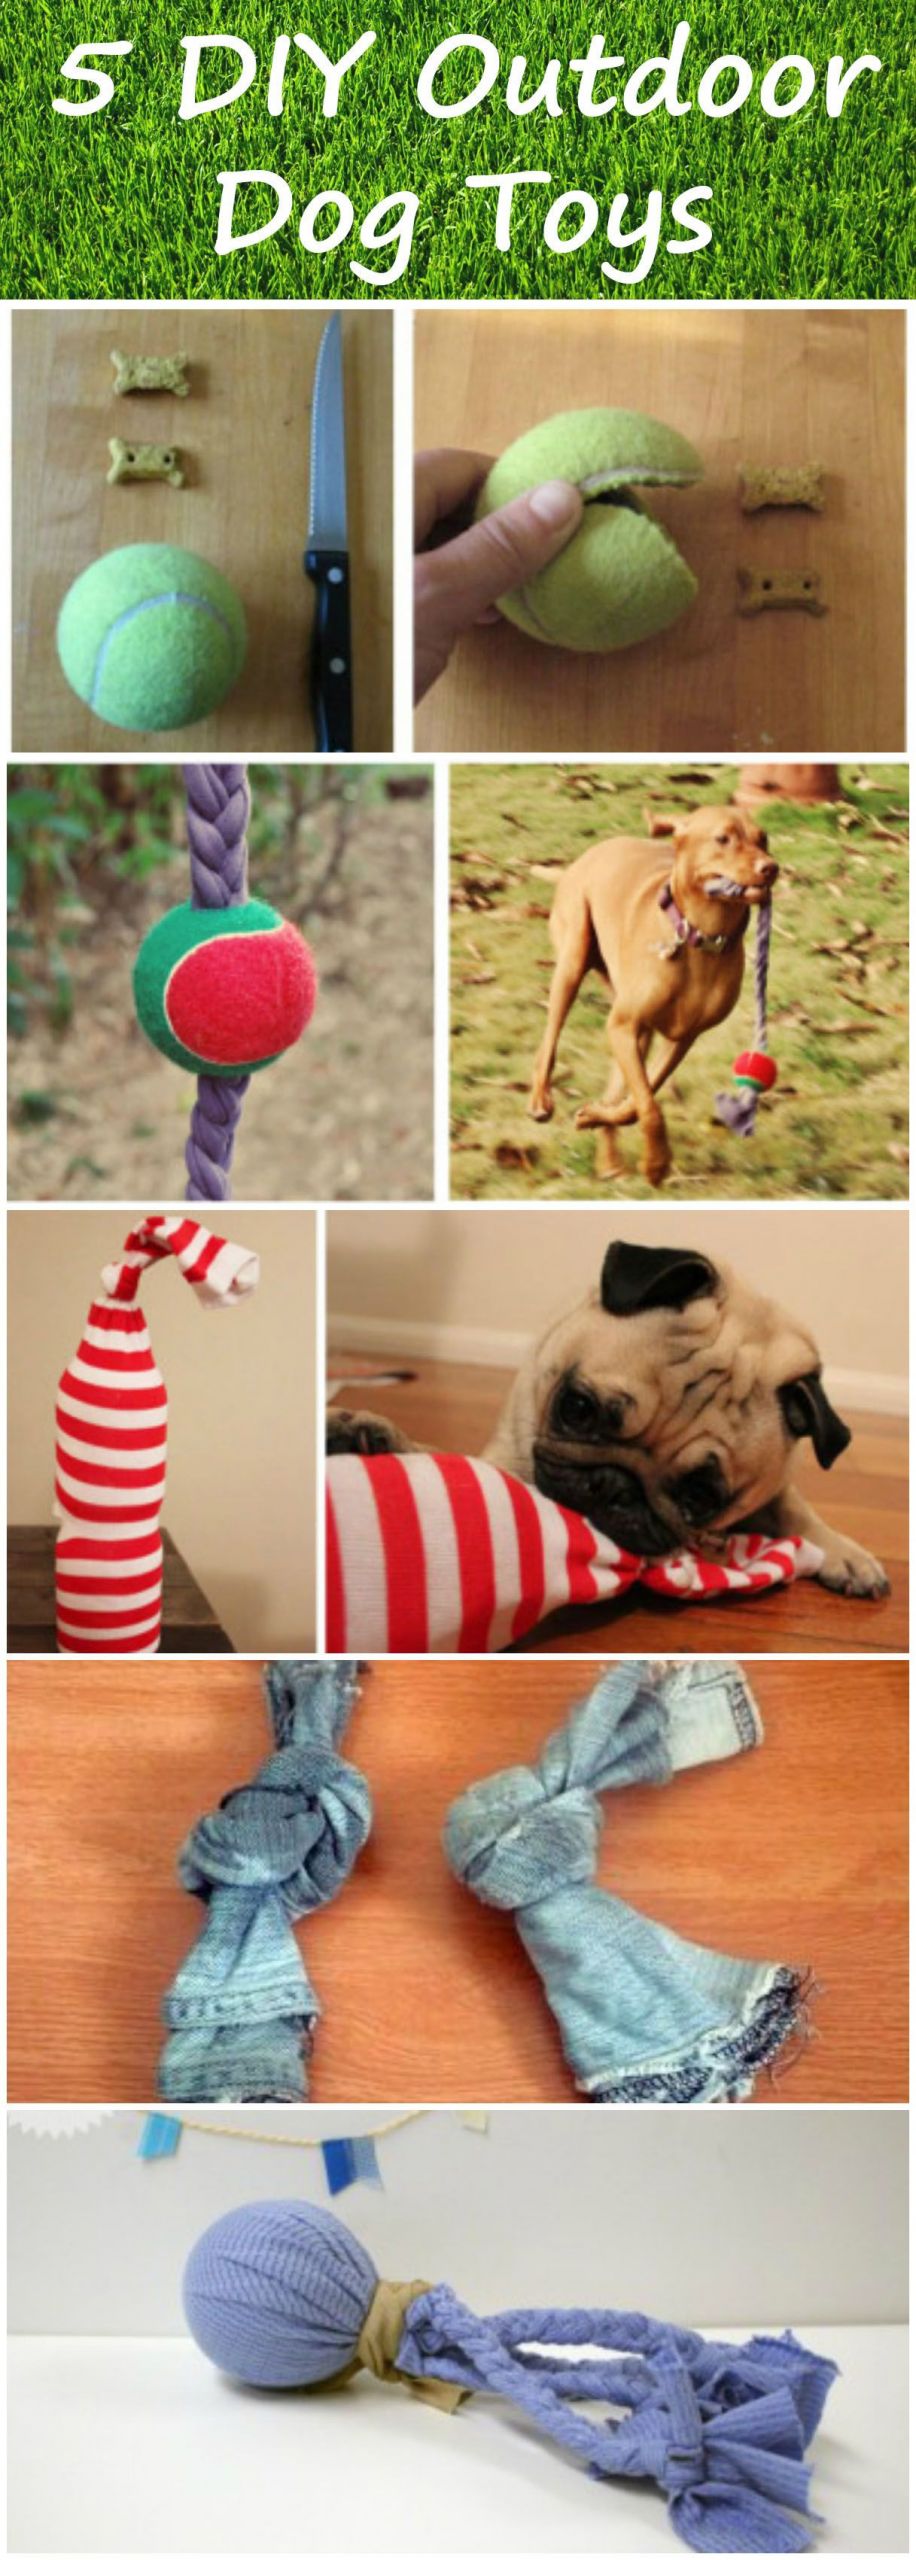 Backyard Dog Toys
 With these simple and effective DIY dog toys your